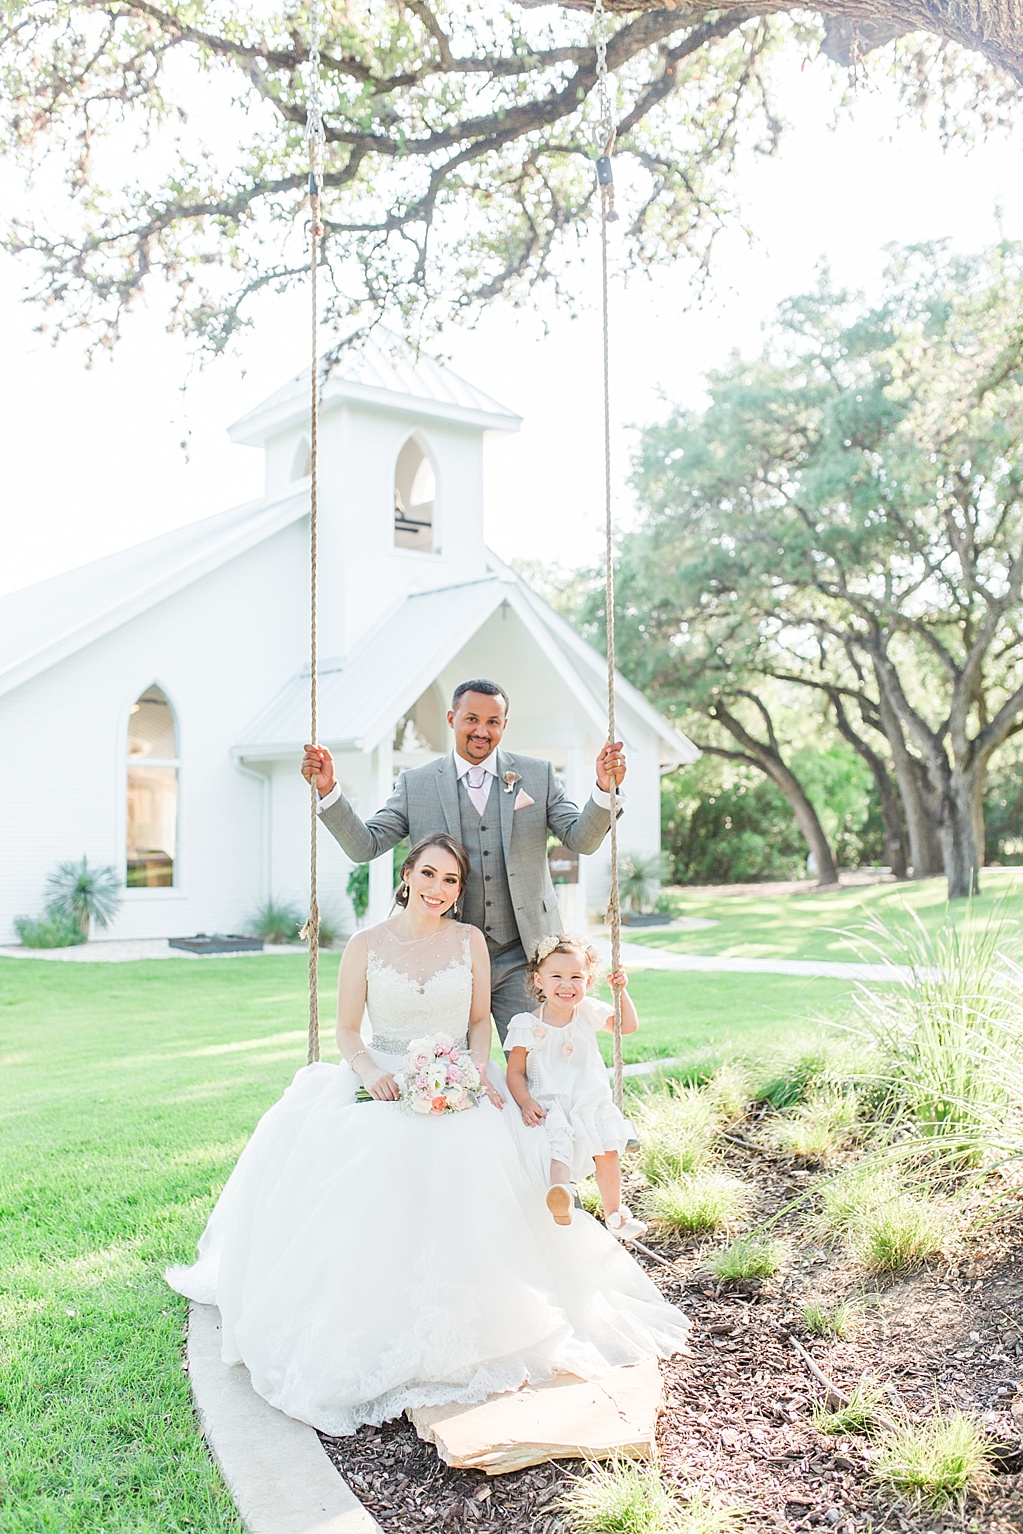 A Blush Vintage Summer Wedding at The Chandelier of Gruene in New Braunfels Texas by Allison Jeffers Photography 0100